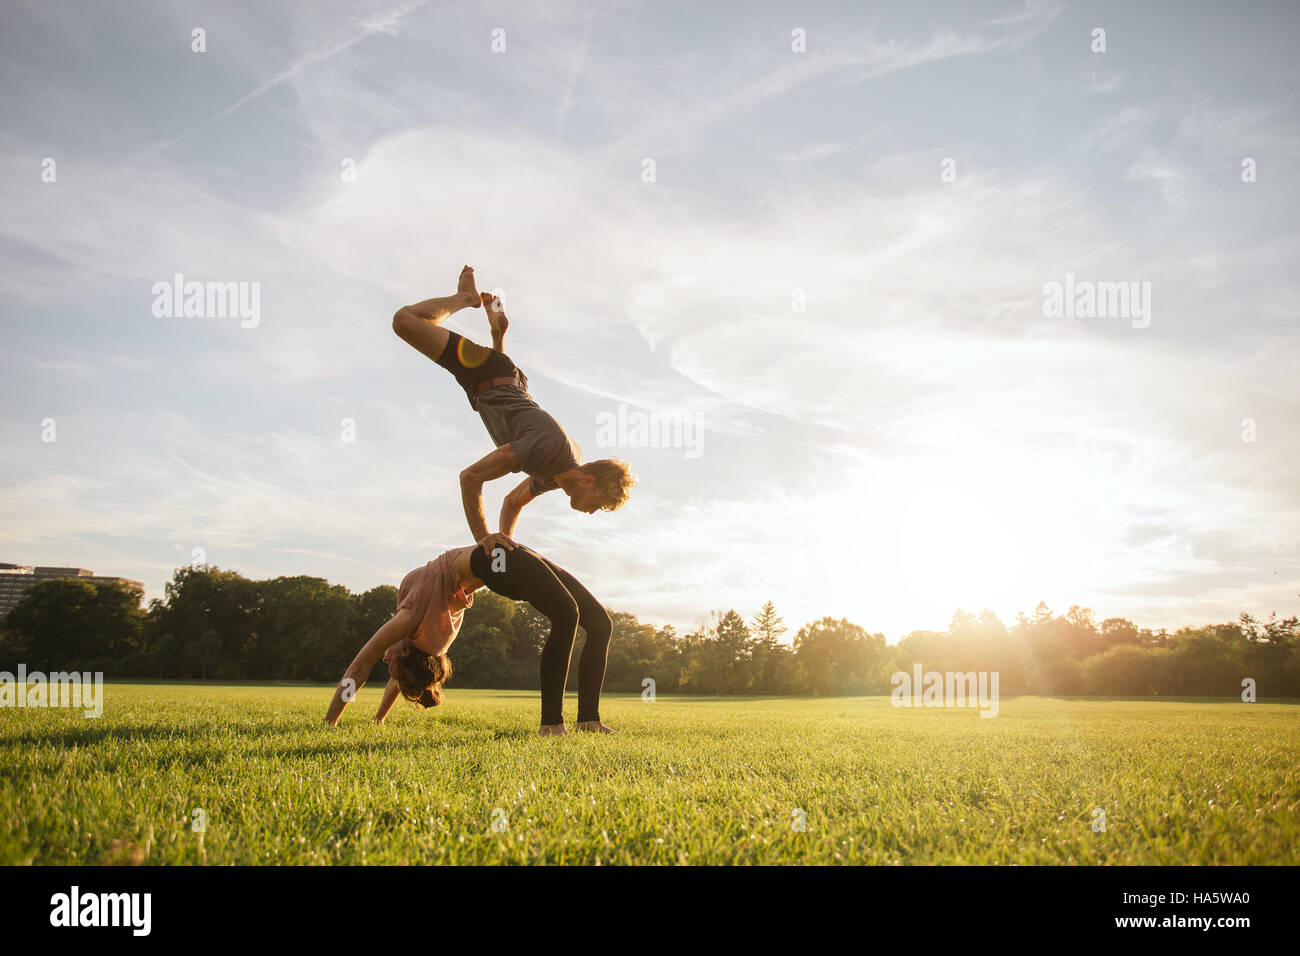 Man and Woman Doing Acro Yoga or Pair Yoga Indoor Stock Photo - Image of  assist, girl: 59837750